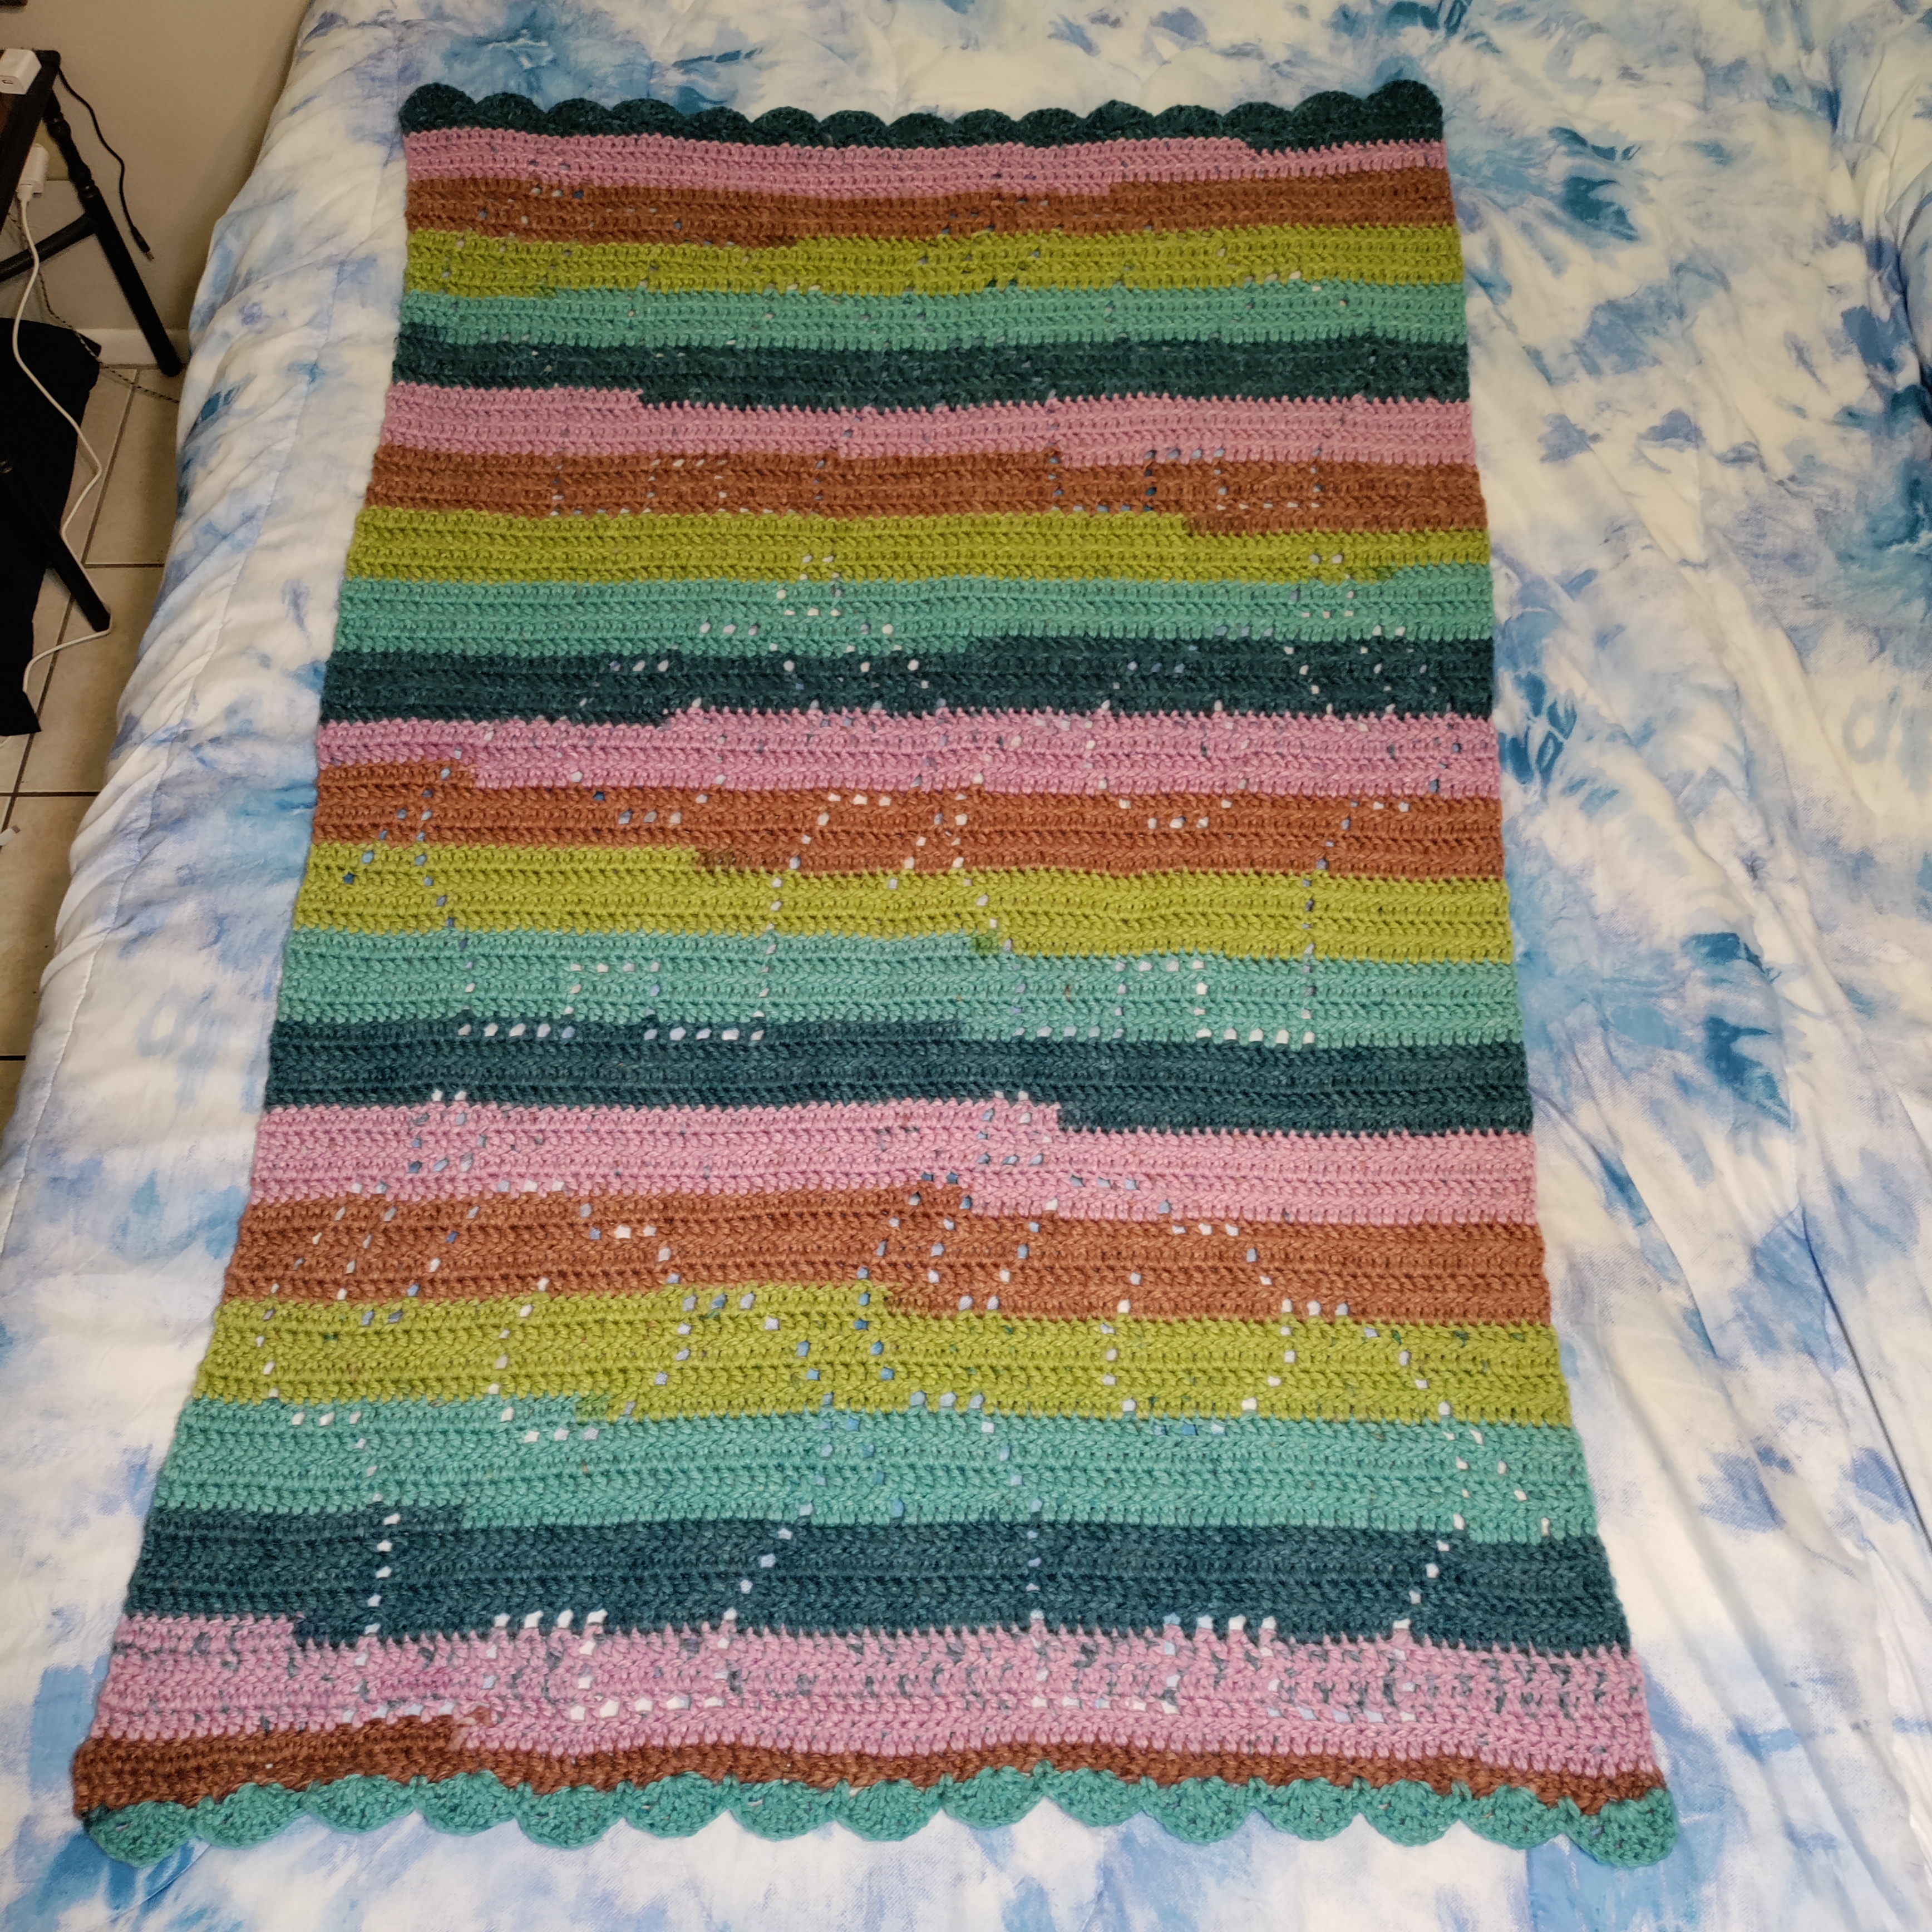 a crocheted blanket with light and dark teals, olive green, brown, and pink stripes that has open stitches shaped like cute elephants with their trunks lifted and hearts above them